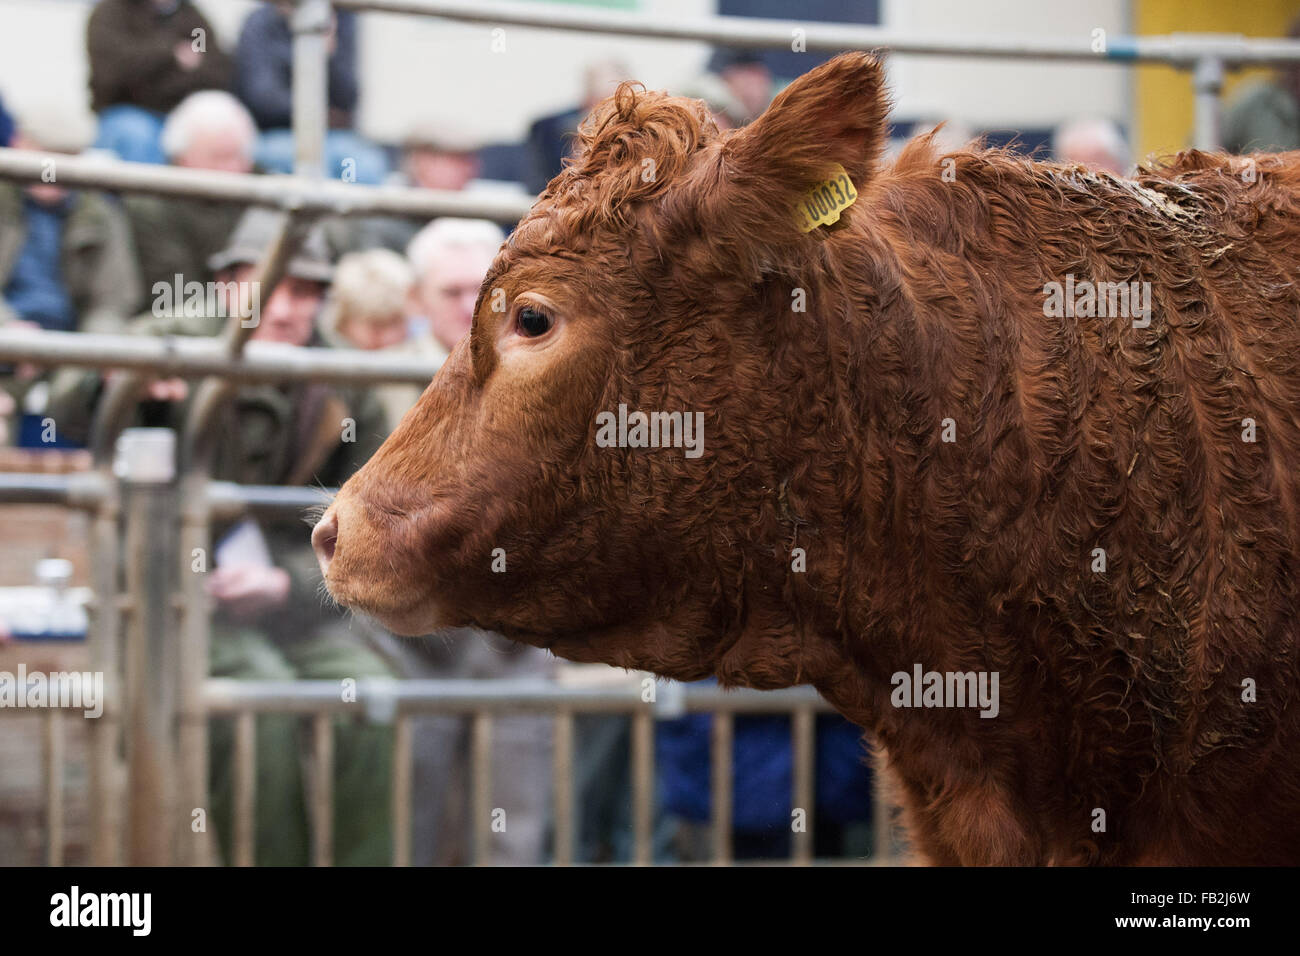 A cow in the auction ring at York Livestock Auction Centre near York in North Yorkshire, UK. Stock Photo